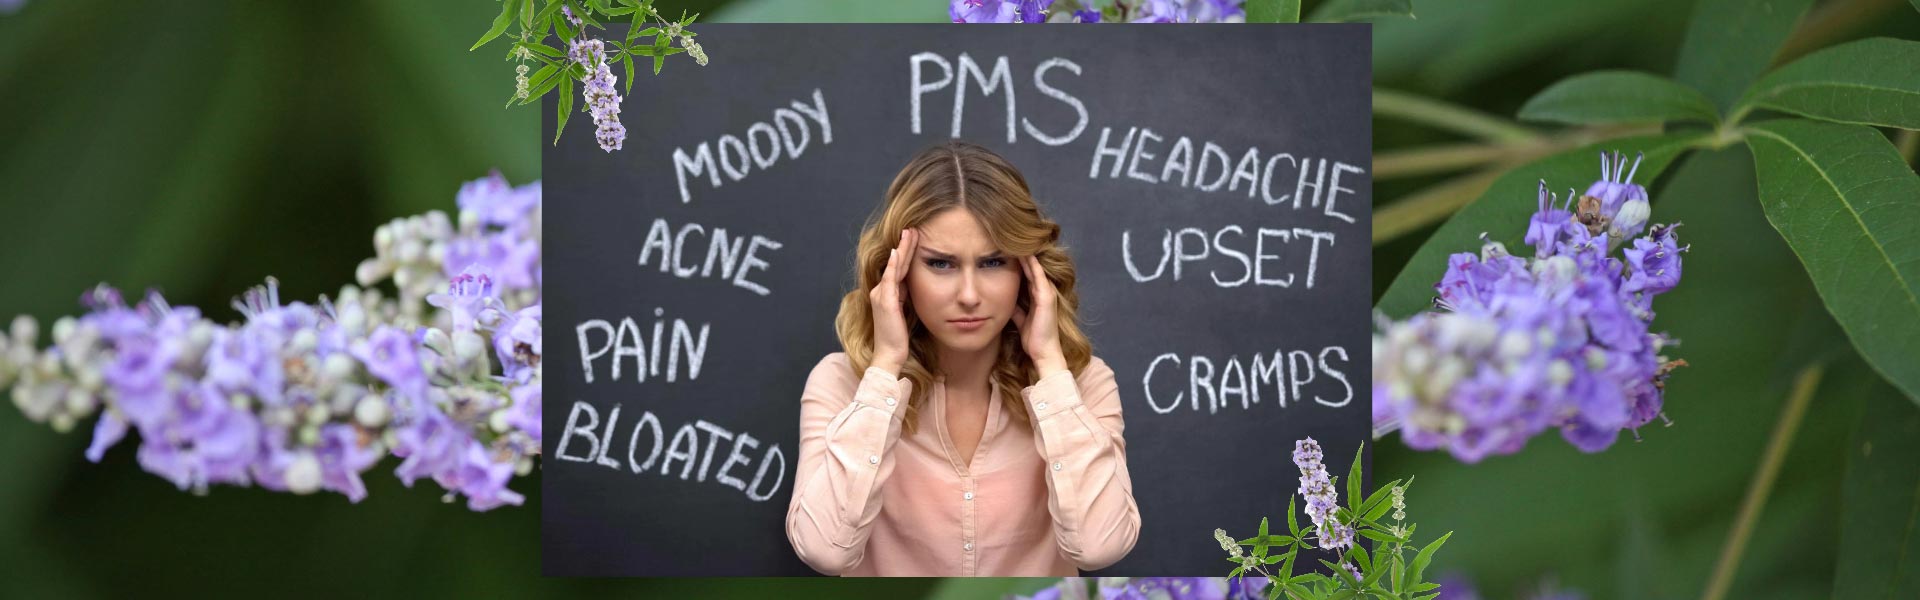 a woman rubbing her temples looking troubled, with text written on the board behind her: PMS, moody, acne, pain, bloated, headache, upset and cramps